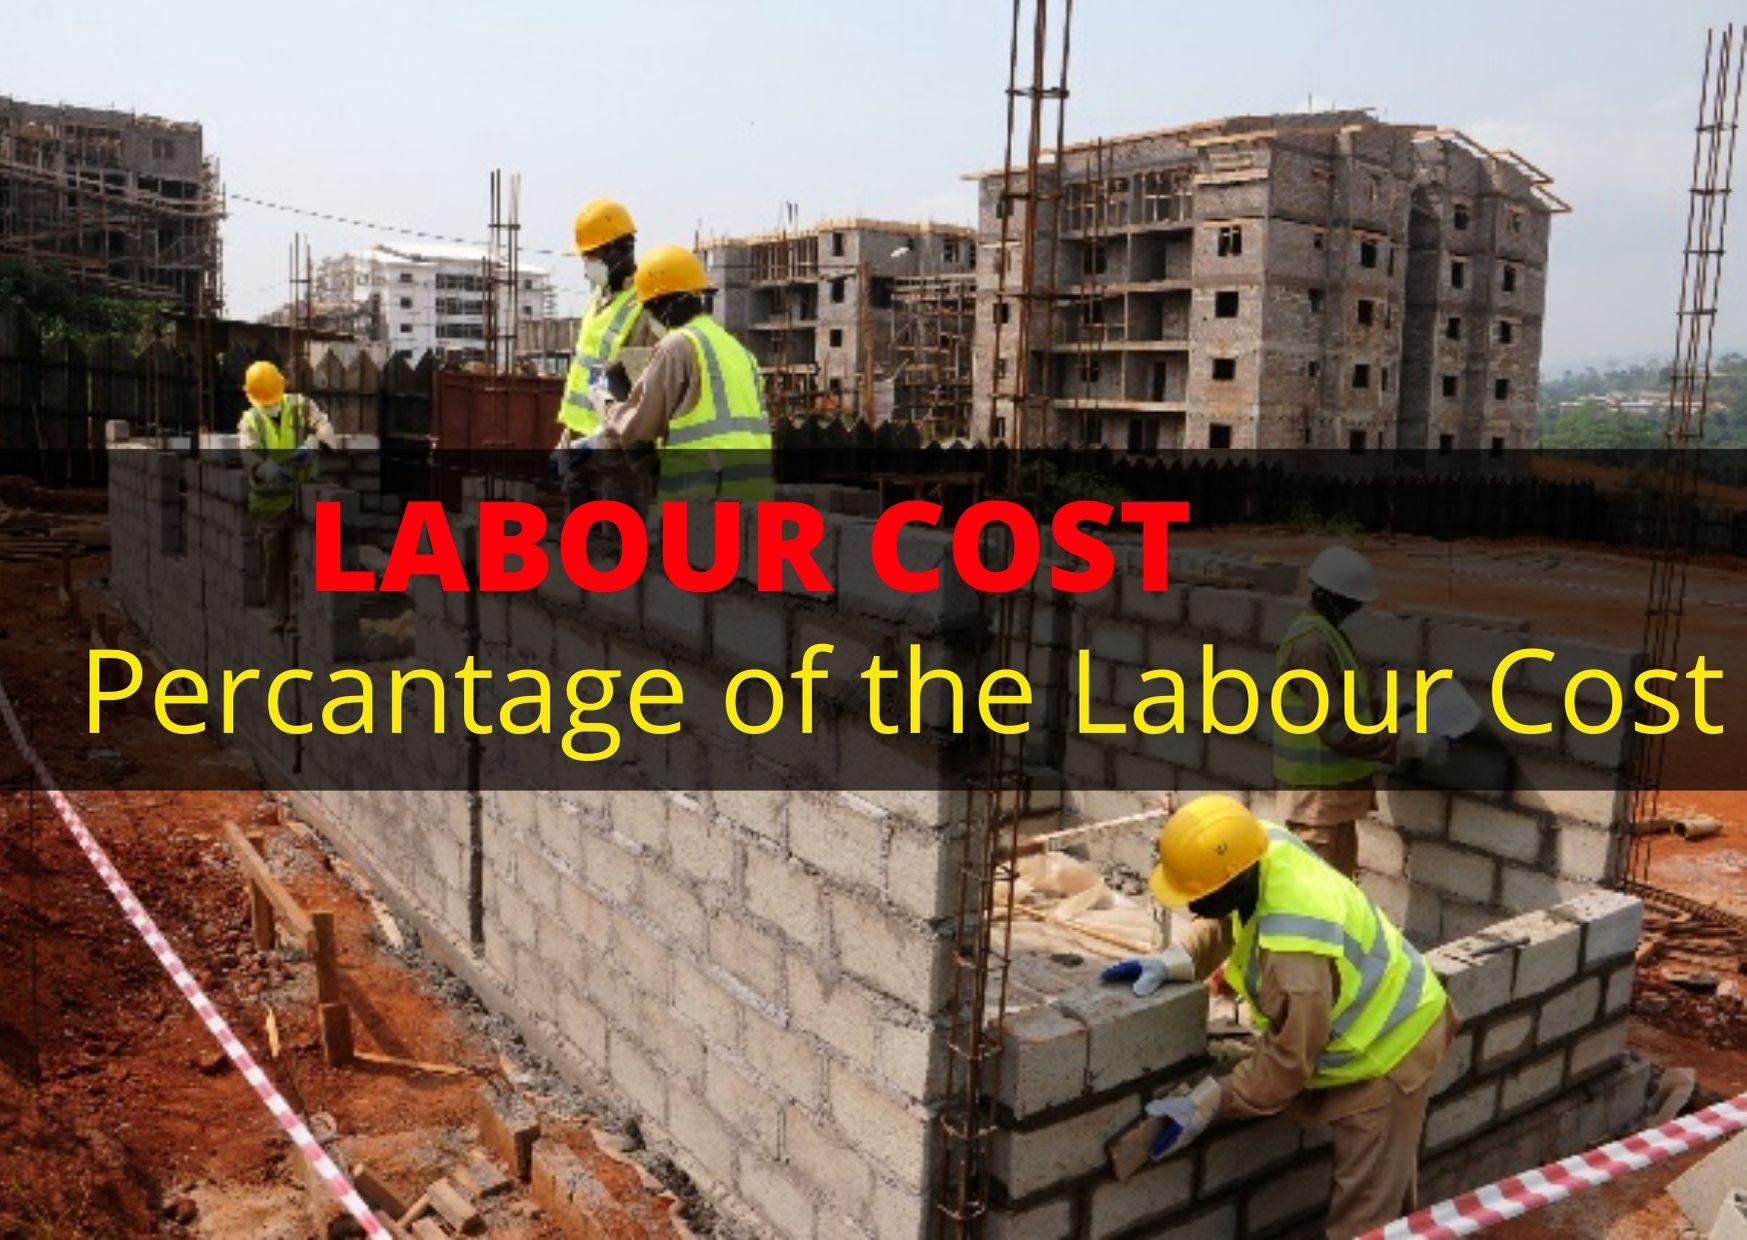 Cost of Labour in Construction